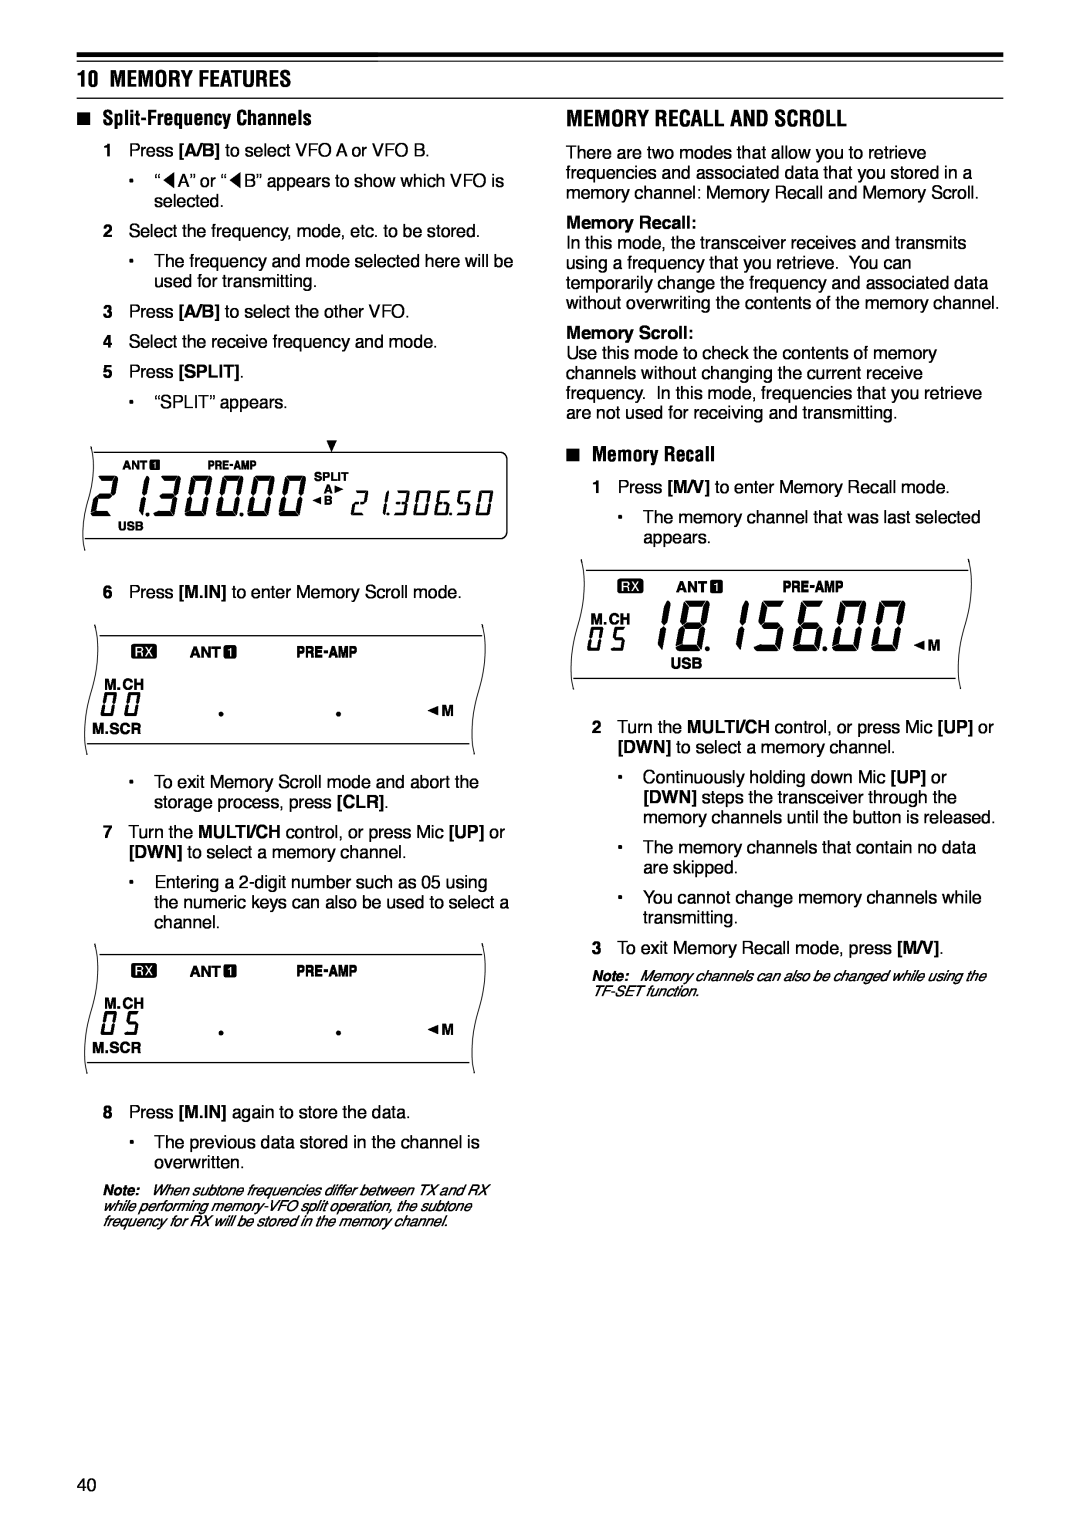 Kenwood TS-570D instruction manual Memory Features, Split-FrequencyChannels, Memory Recall 